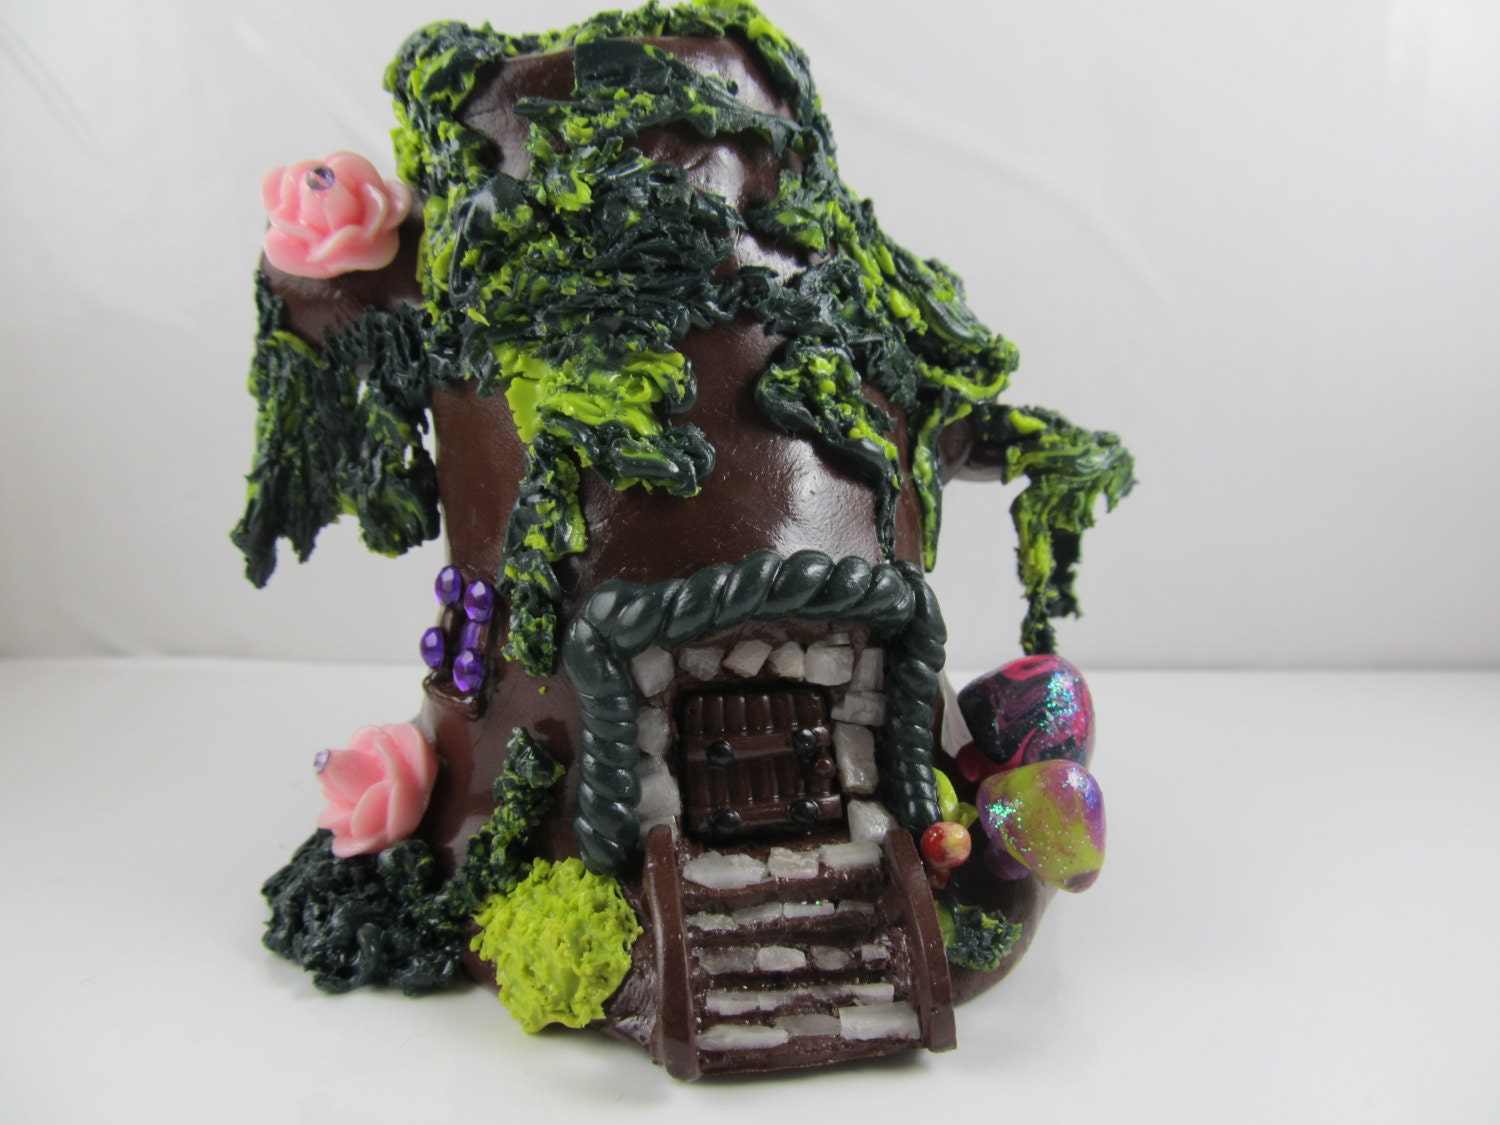 OOAK Fairy tree house sculpture, encased in moss. Polymer clay, Real Quartz shards used! - OrangeStARTiquities